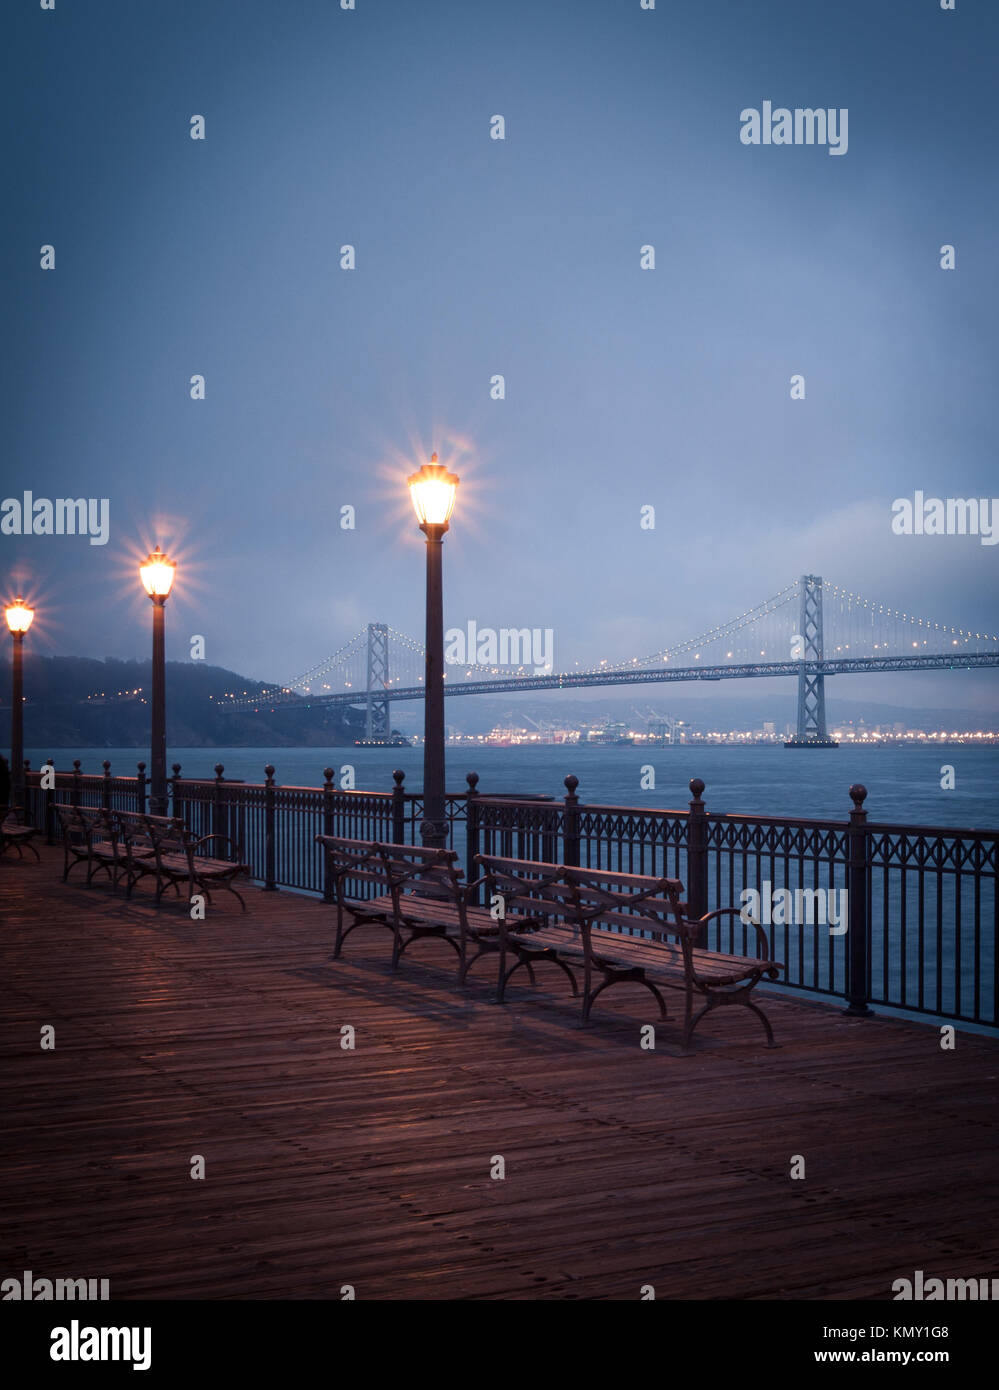 A view of Pier 7 and the Bay Bridge in San Francisco, California. Stock Photo